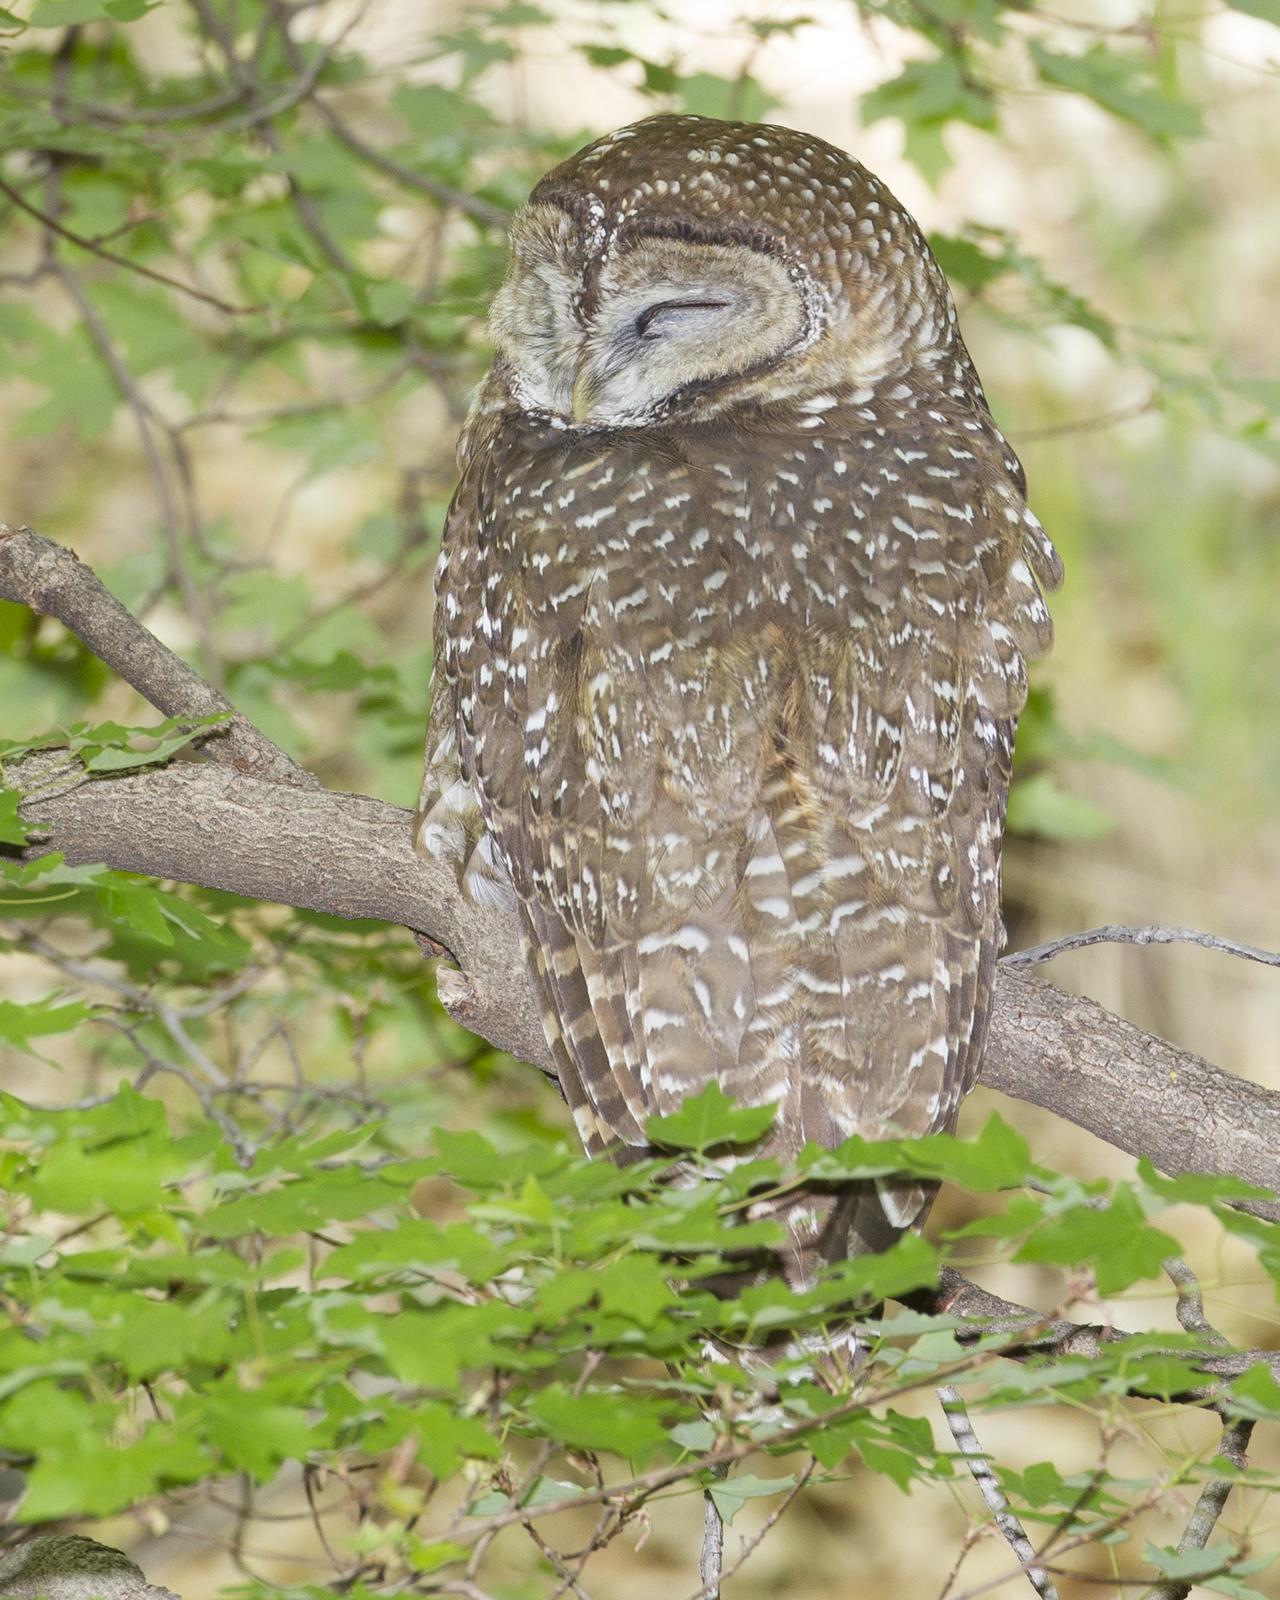 Spotted Owl Photo by Jeff Moore